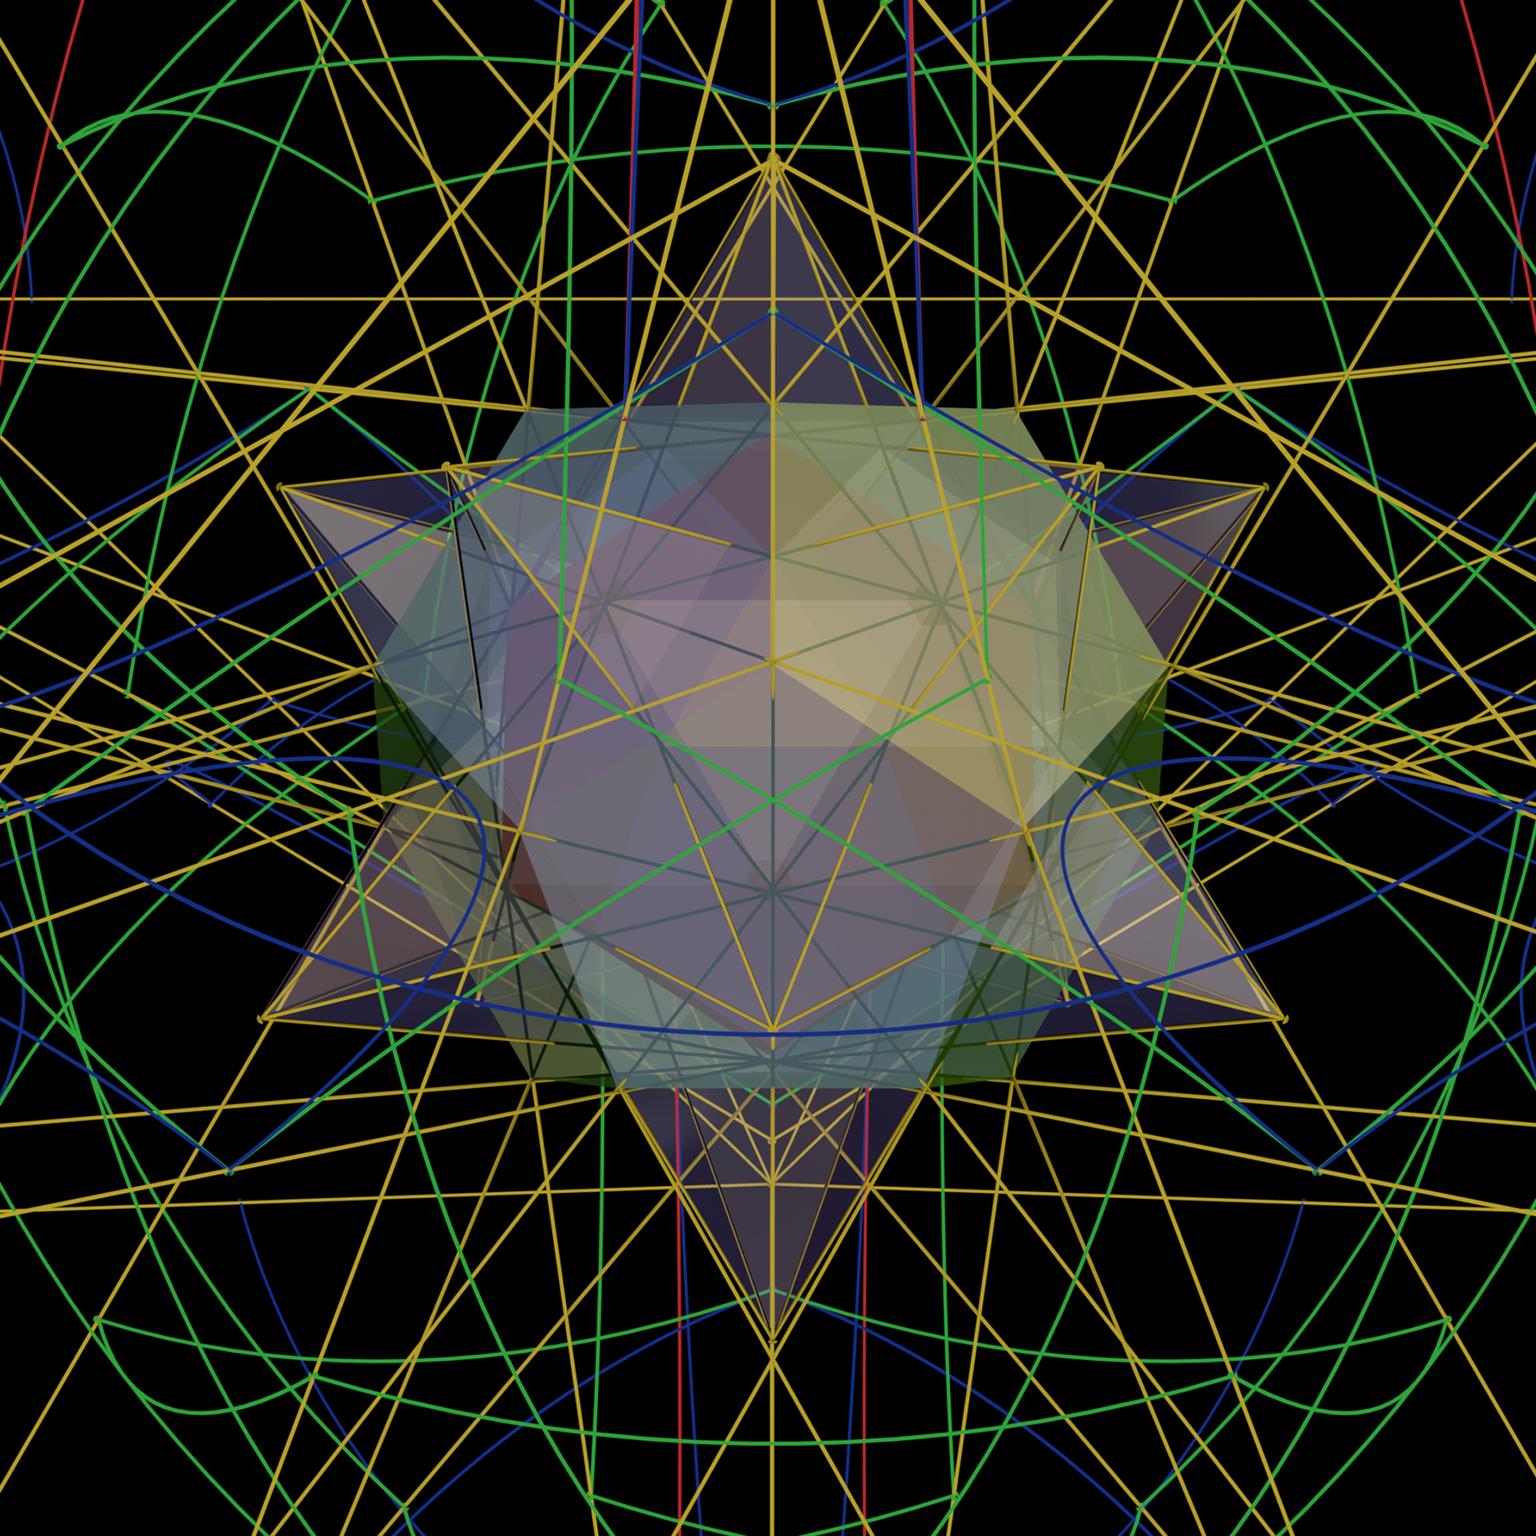 Image for entry 'The Complex Center of the Epita-dodecahedron'